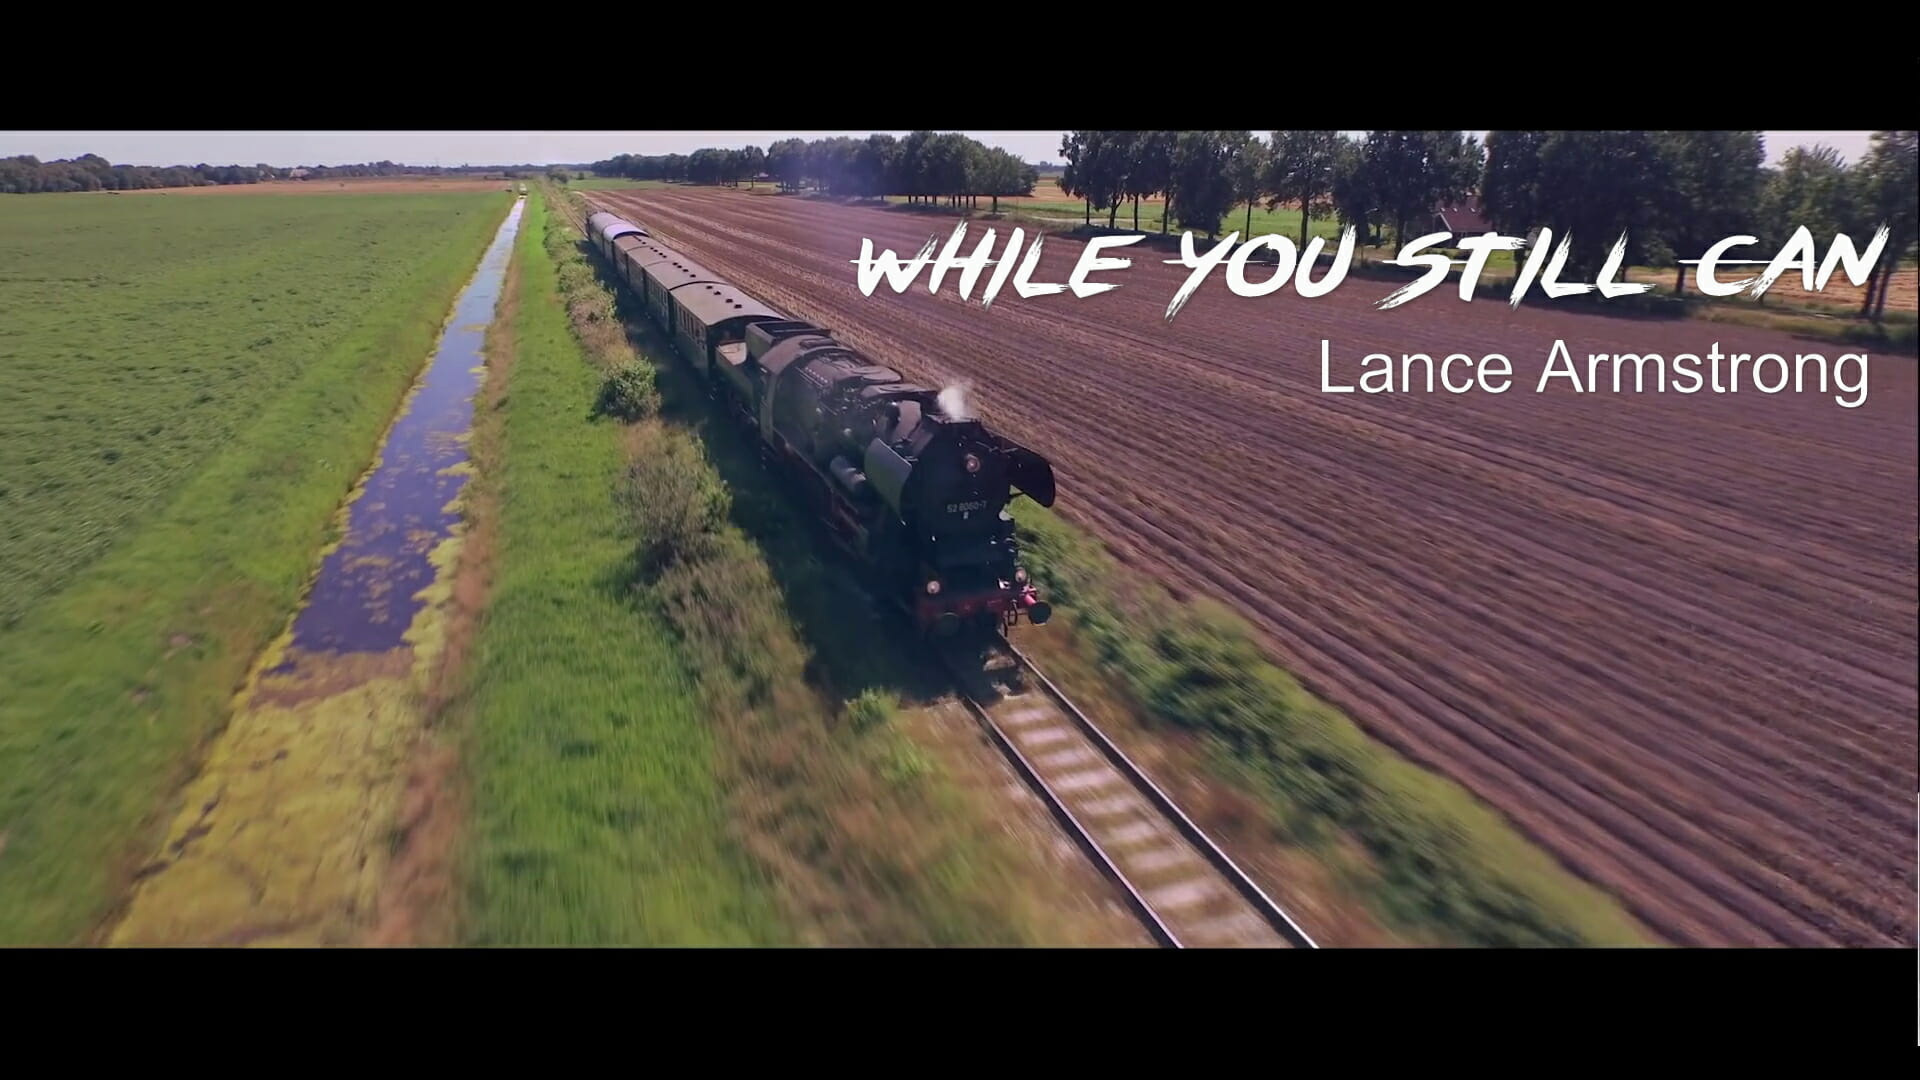 “While You Still Can” with Lance Armstrong